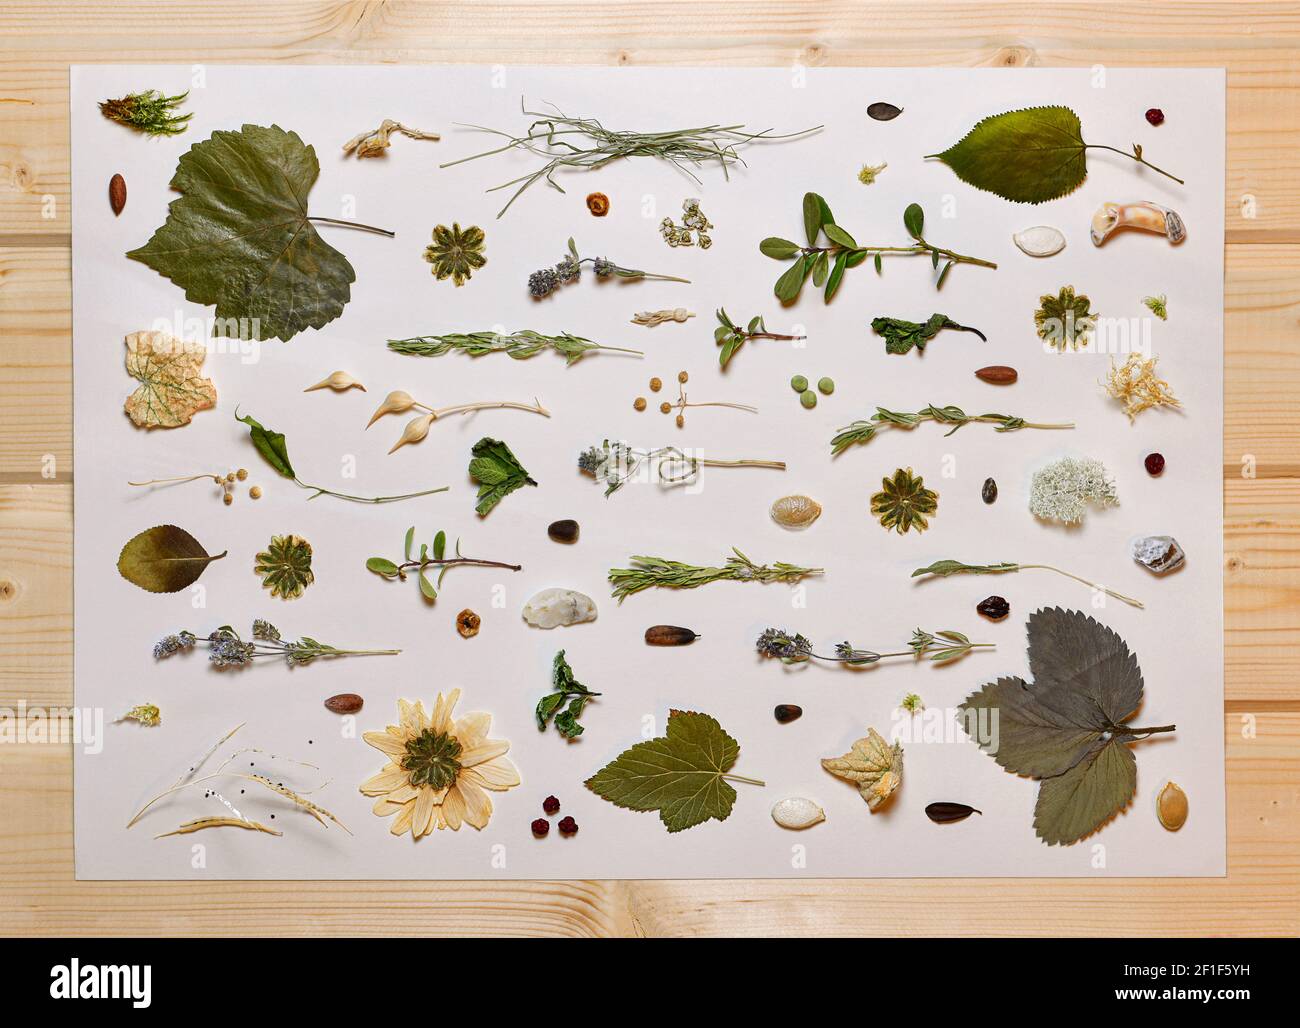 Dried plant parts, seeds and minerals. Flat lay natural material means alternative medicine on a white background with a wooden frame. Stock Photo